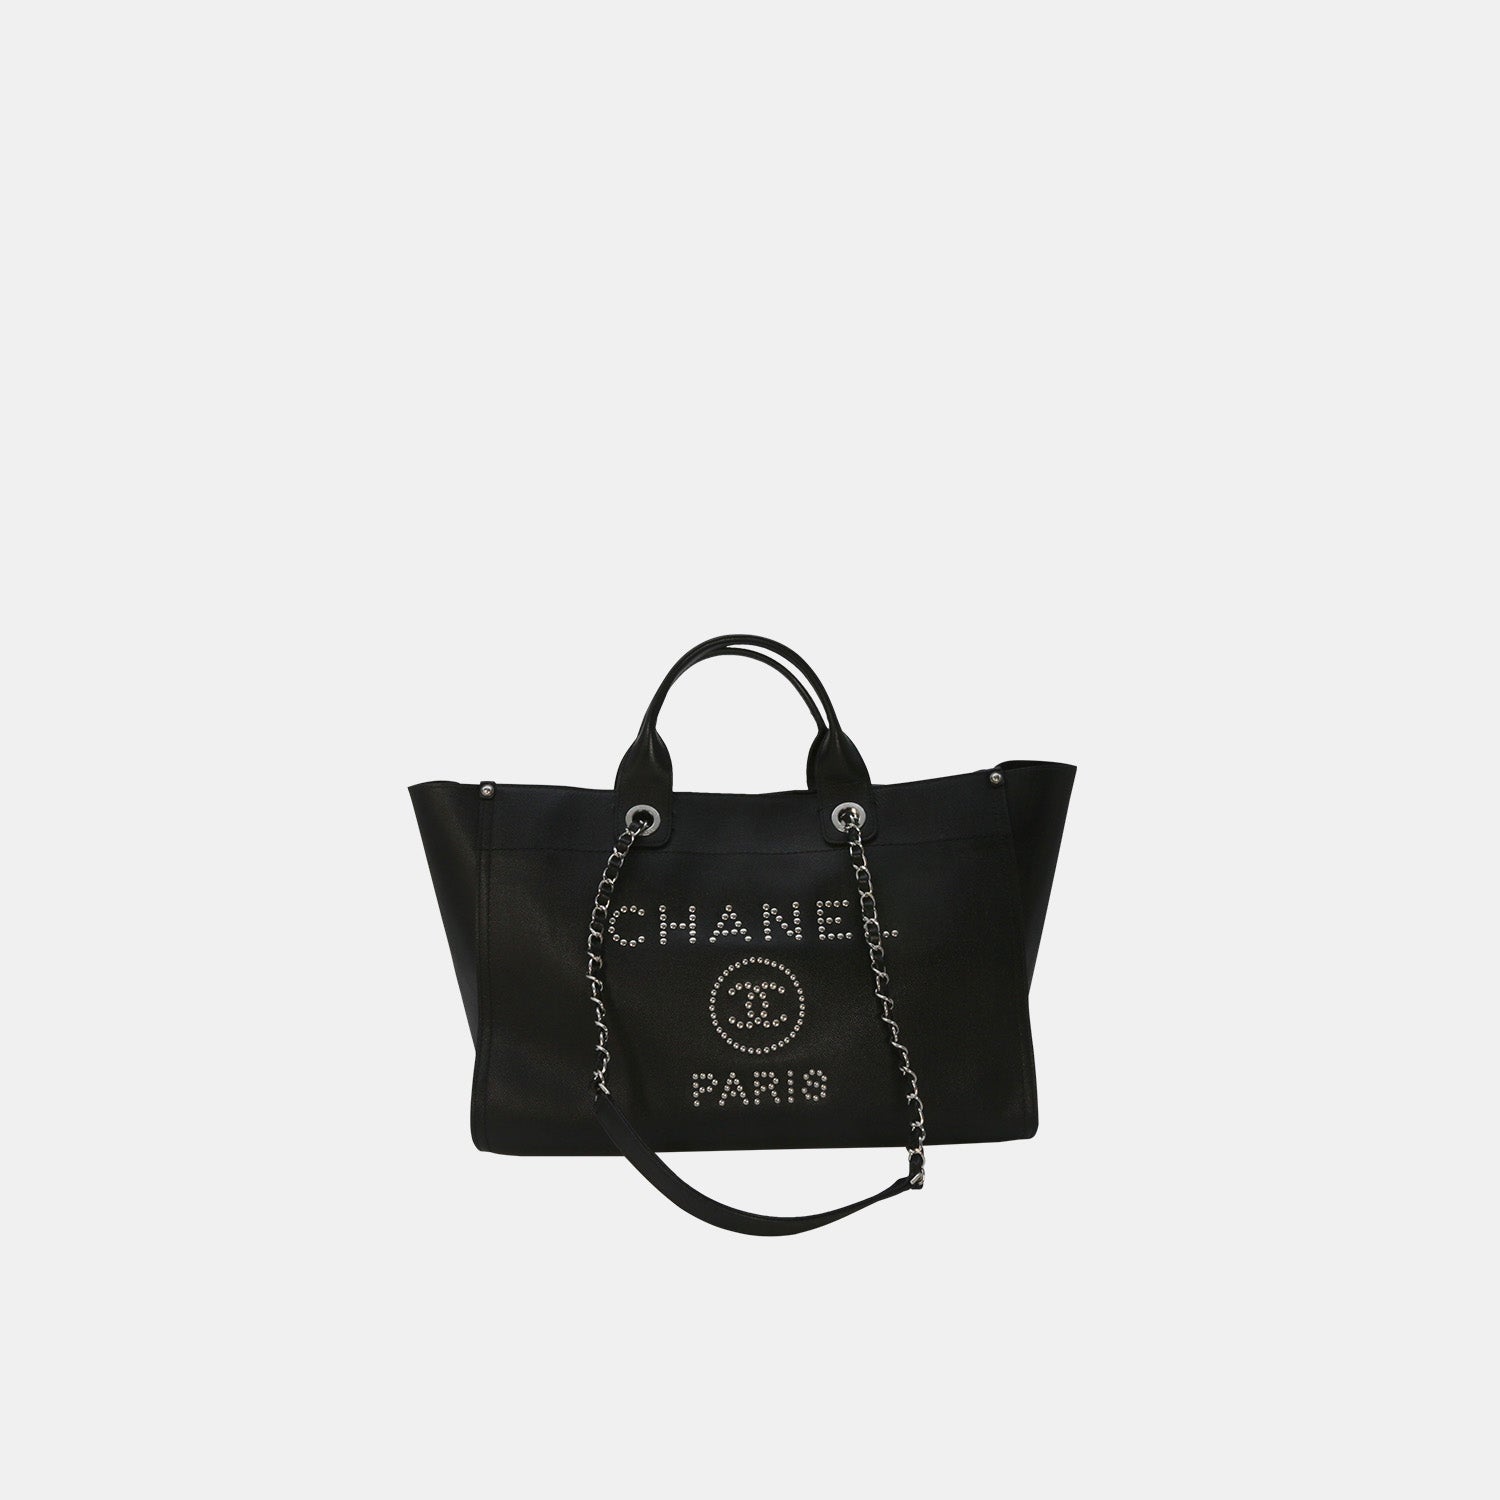 Chanel Deauville Tote Bag Large Shopping A66941 Black Leather